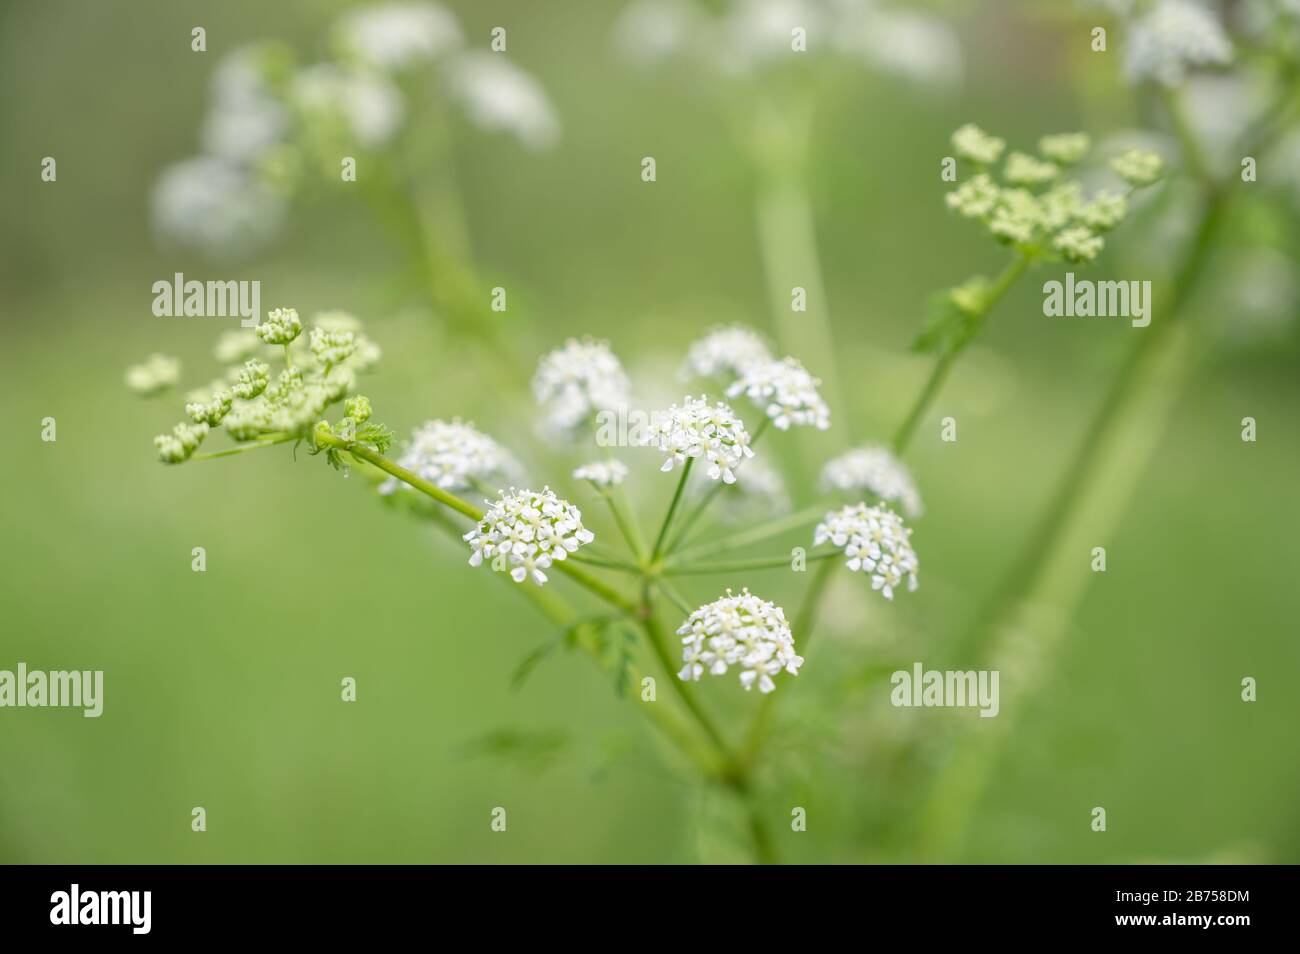 Detail photography of angelica sylvestris plant in spring with unfocused background Stock Photo